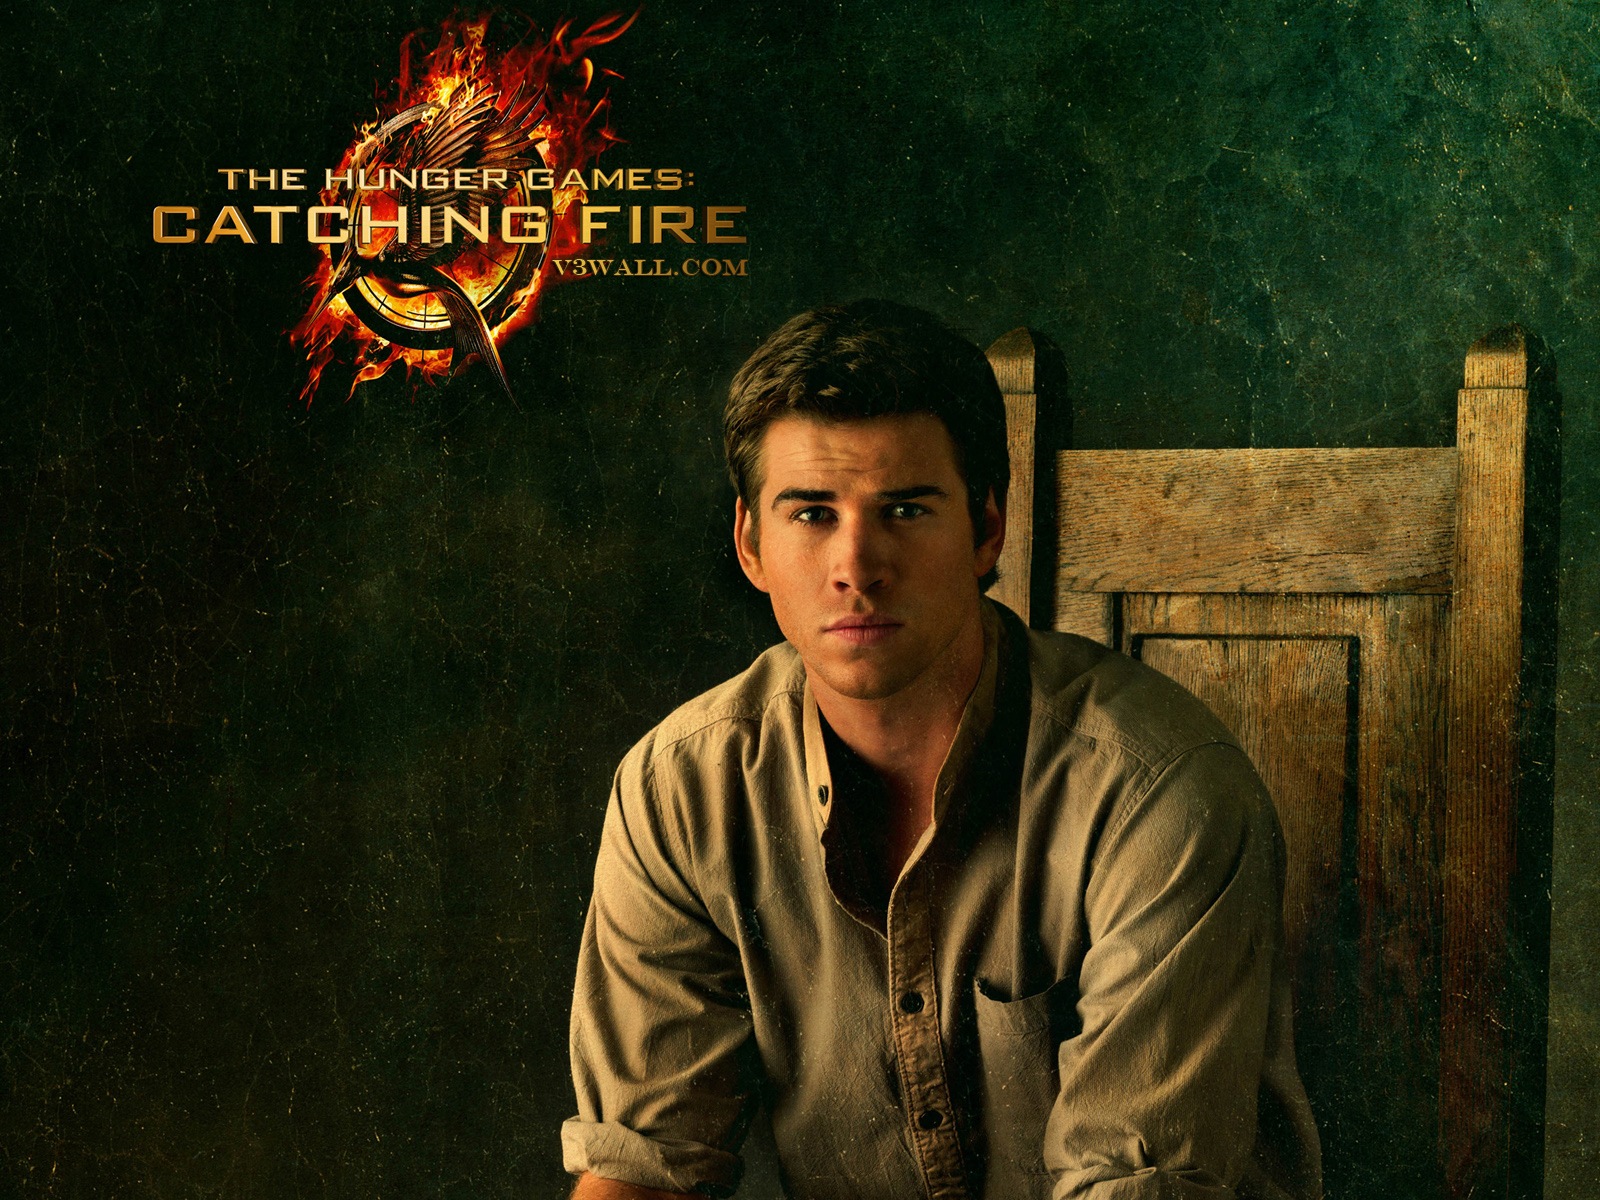 The Hunger Games: Catching Fire wallpapers HD #9 - 1600x1200